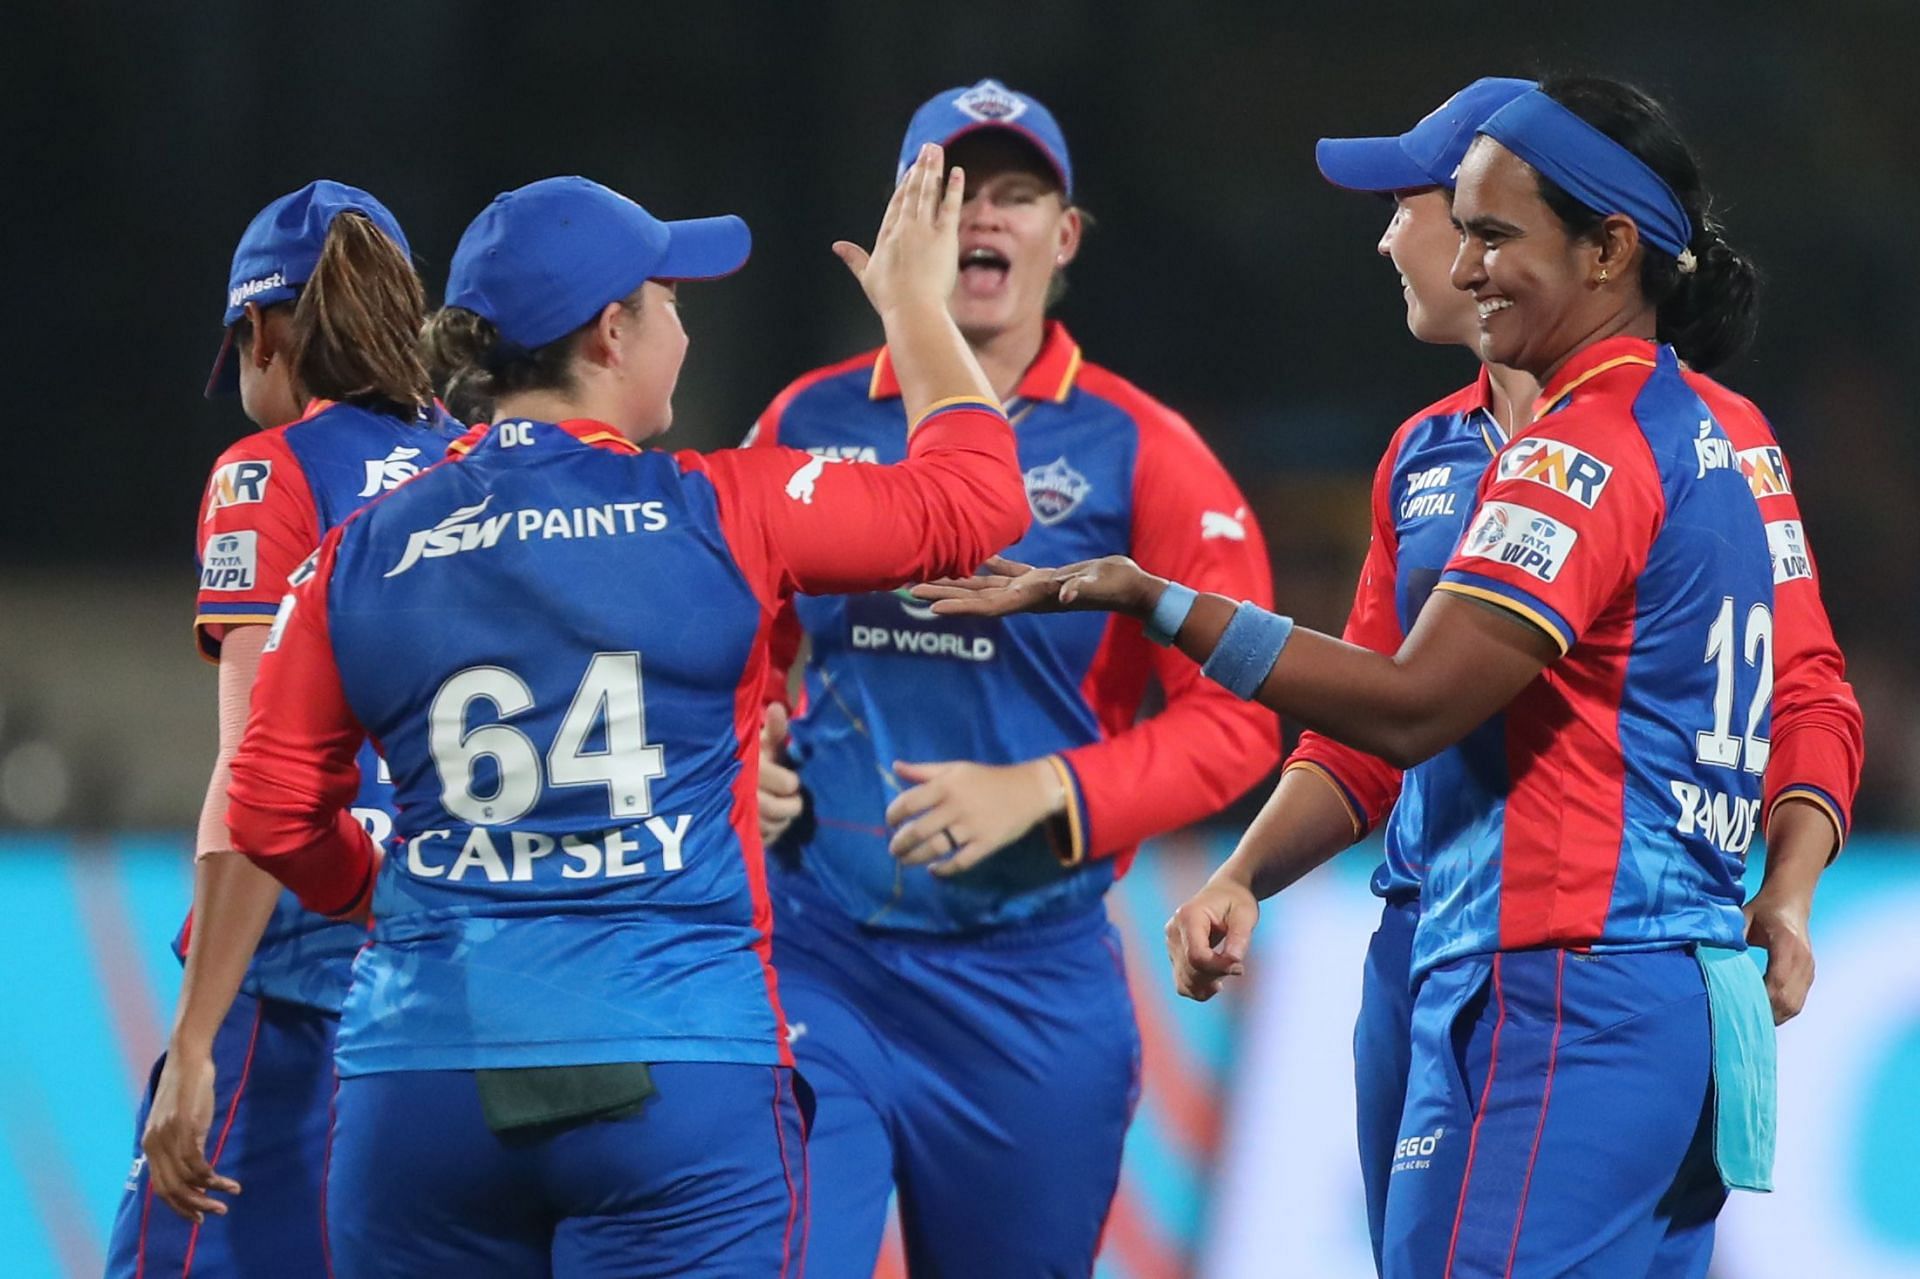 Delhi Capitals will play their first home match in WPL history (Image: WPL/X)